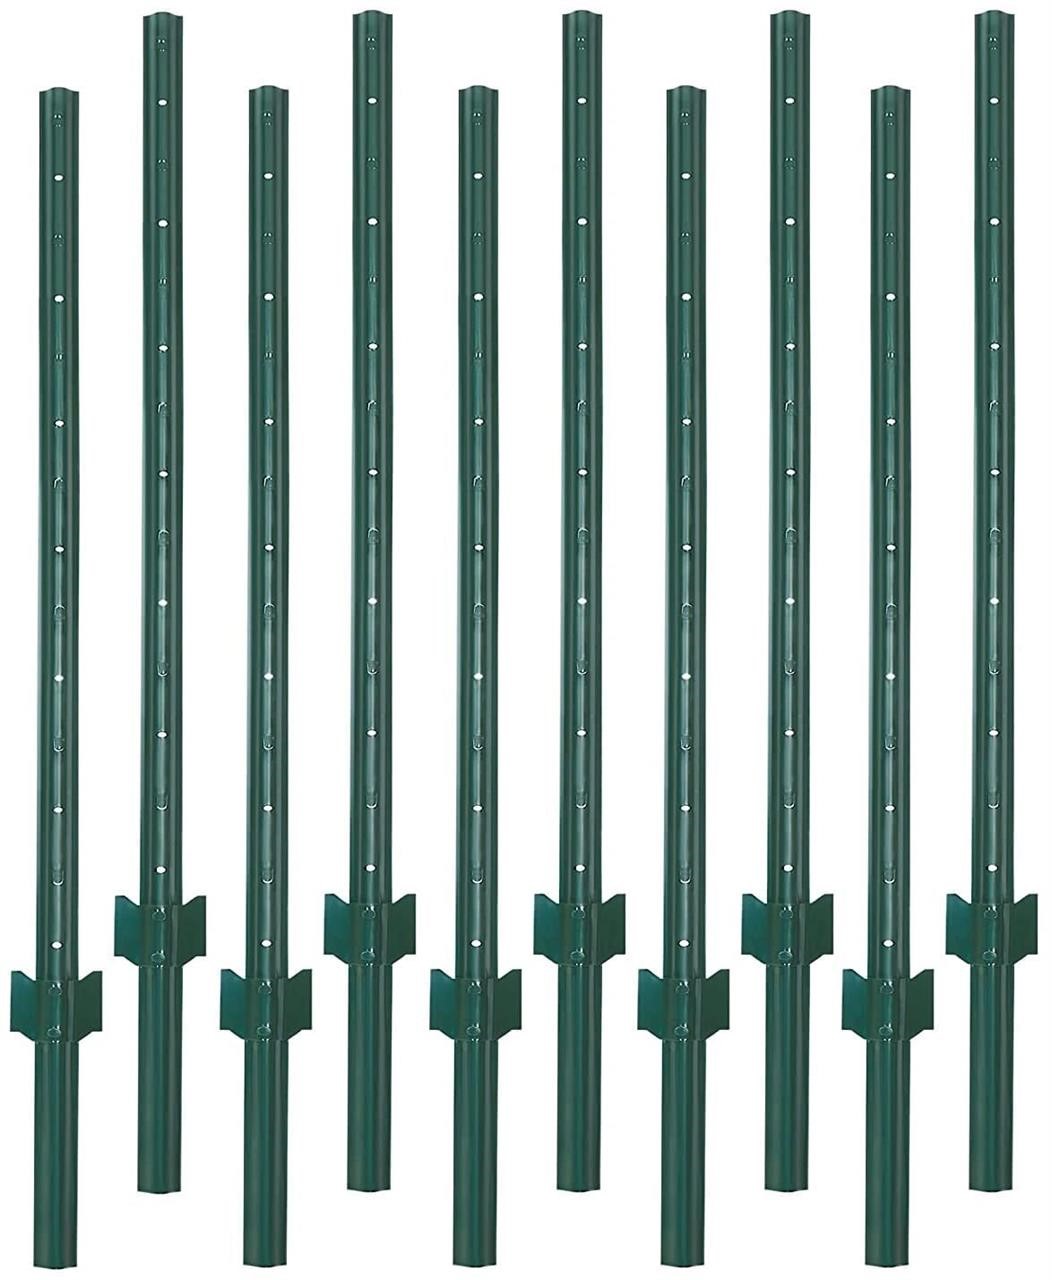 7 Ft Sturdy Duty Metal Fence Post - 10 Pack